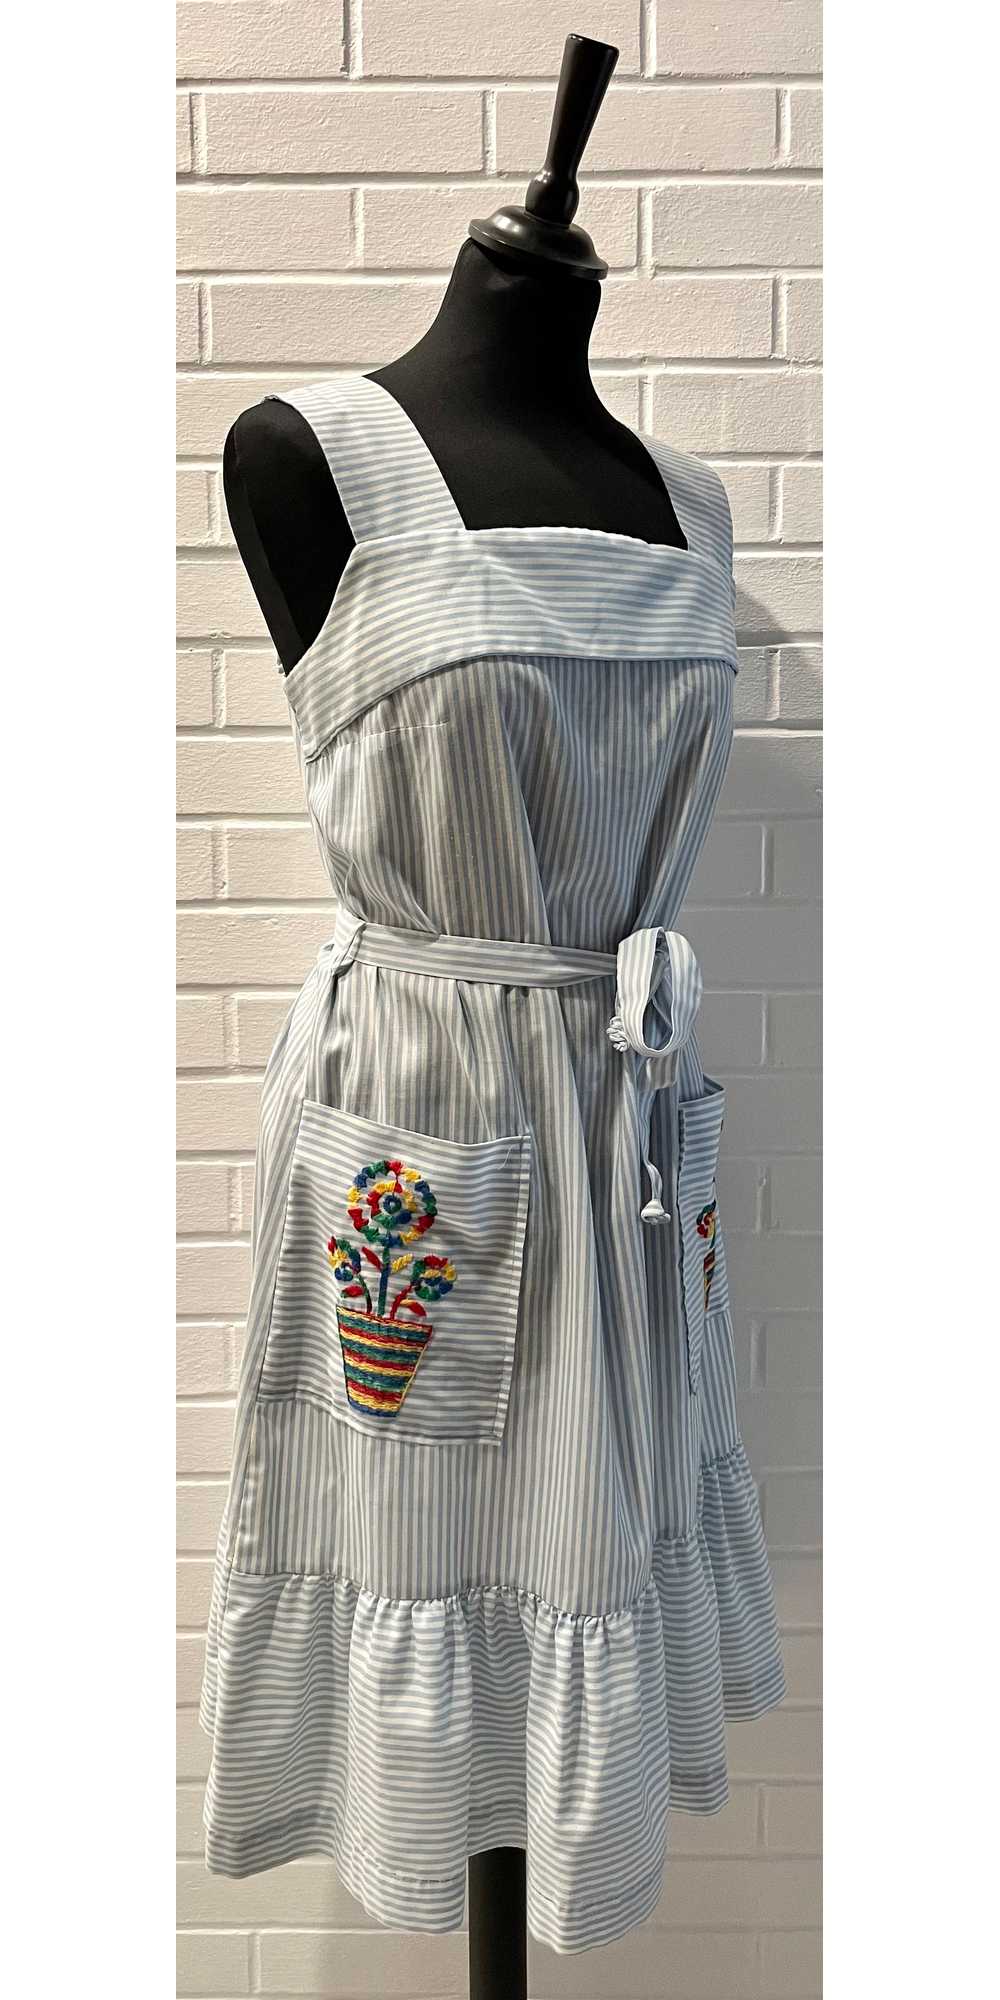 1960s Striped Embroidered Sundress/ Housedress - image 6